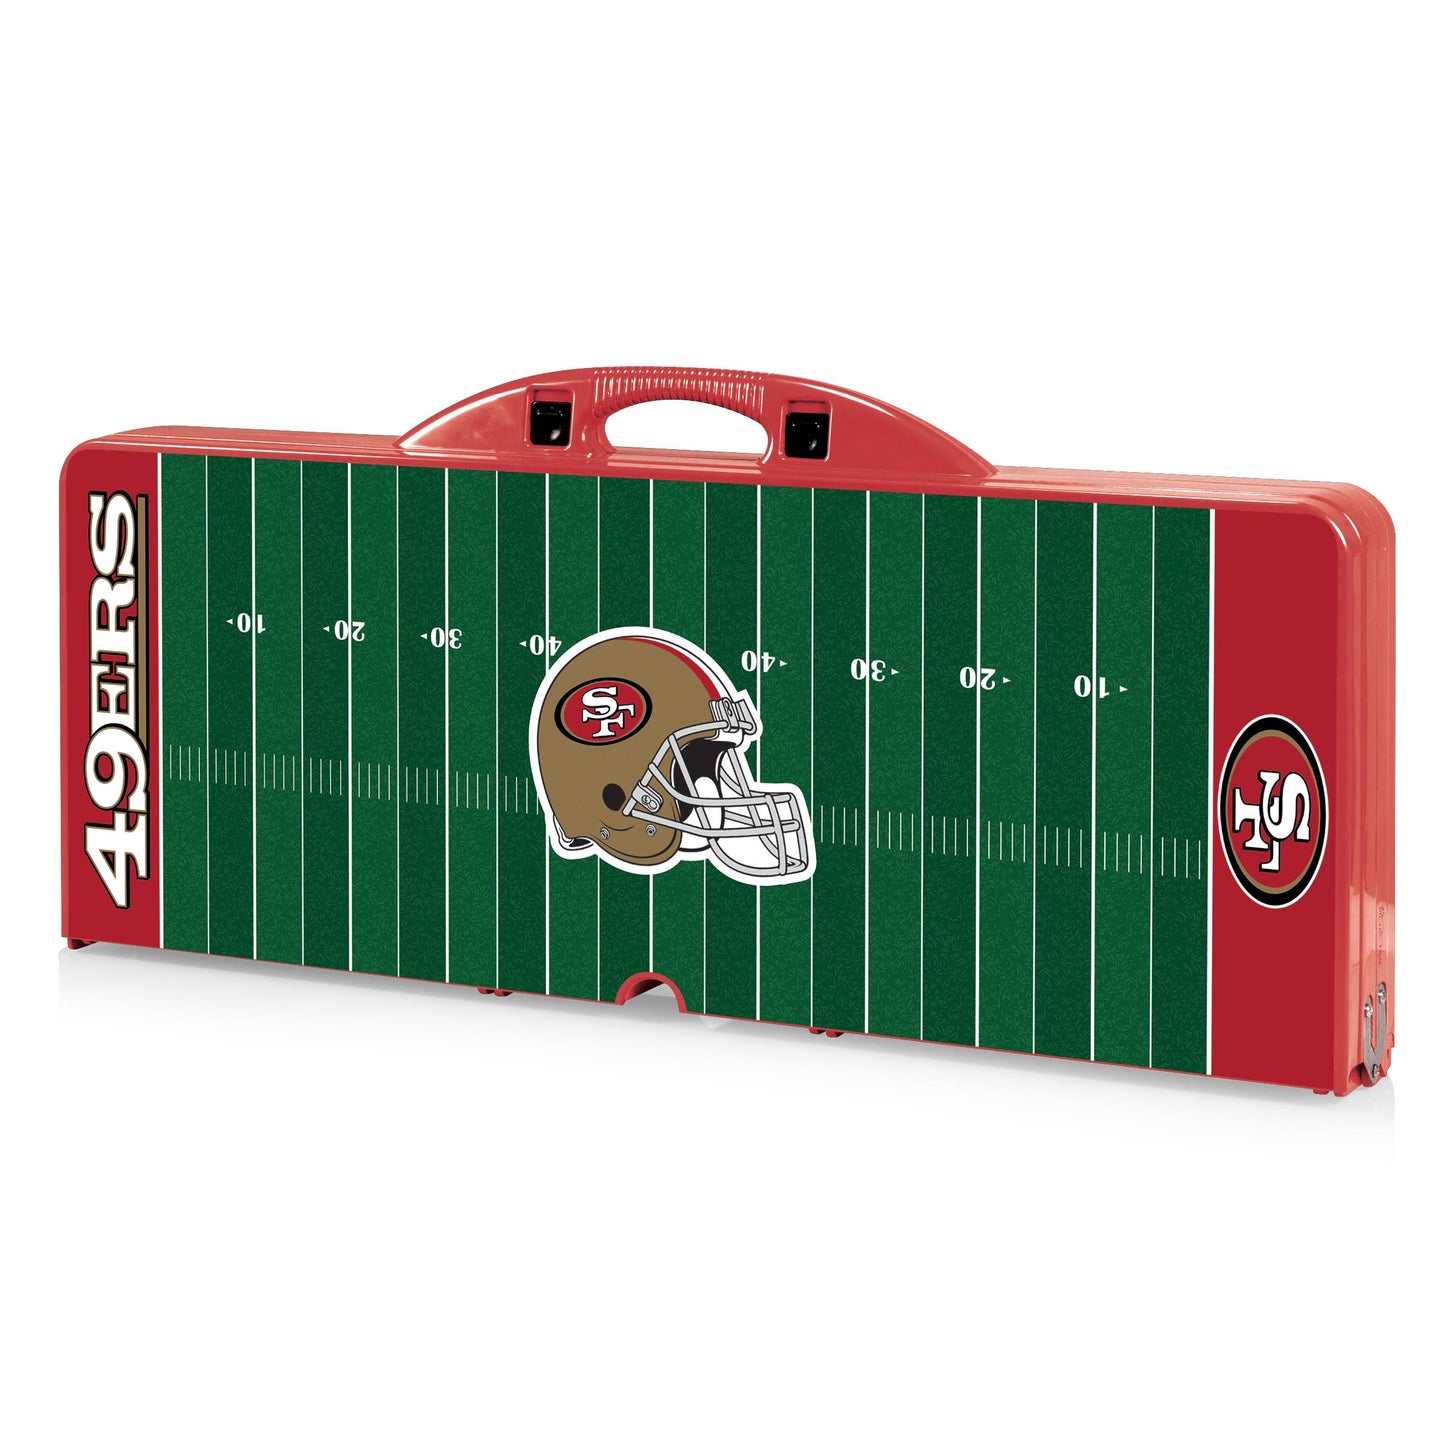 San Francisco 49ers - Picnic Table Portable Folding Table with Seats - Football Field